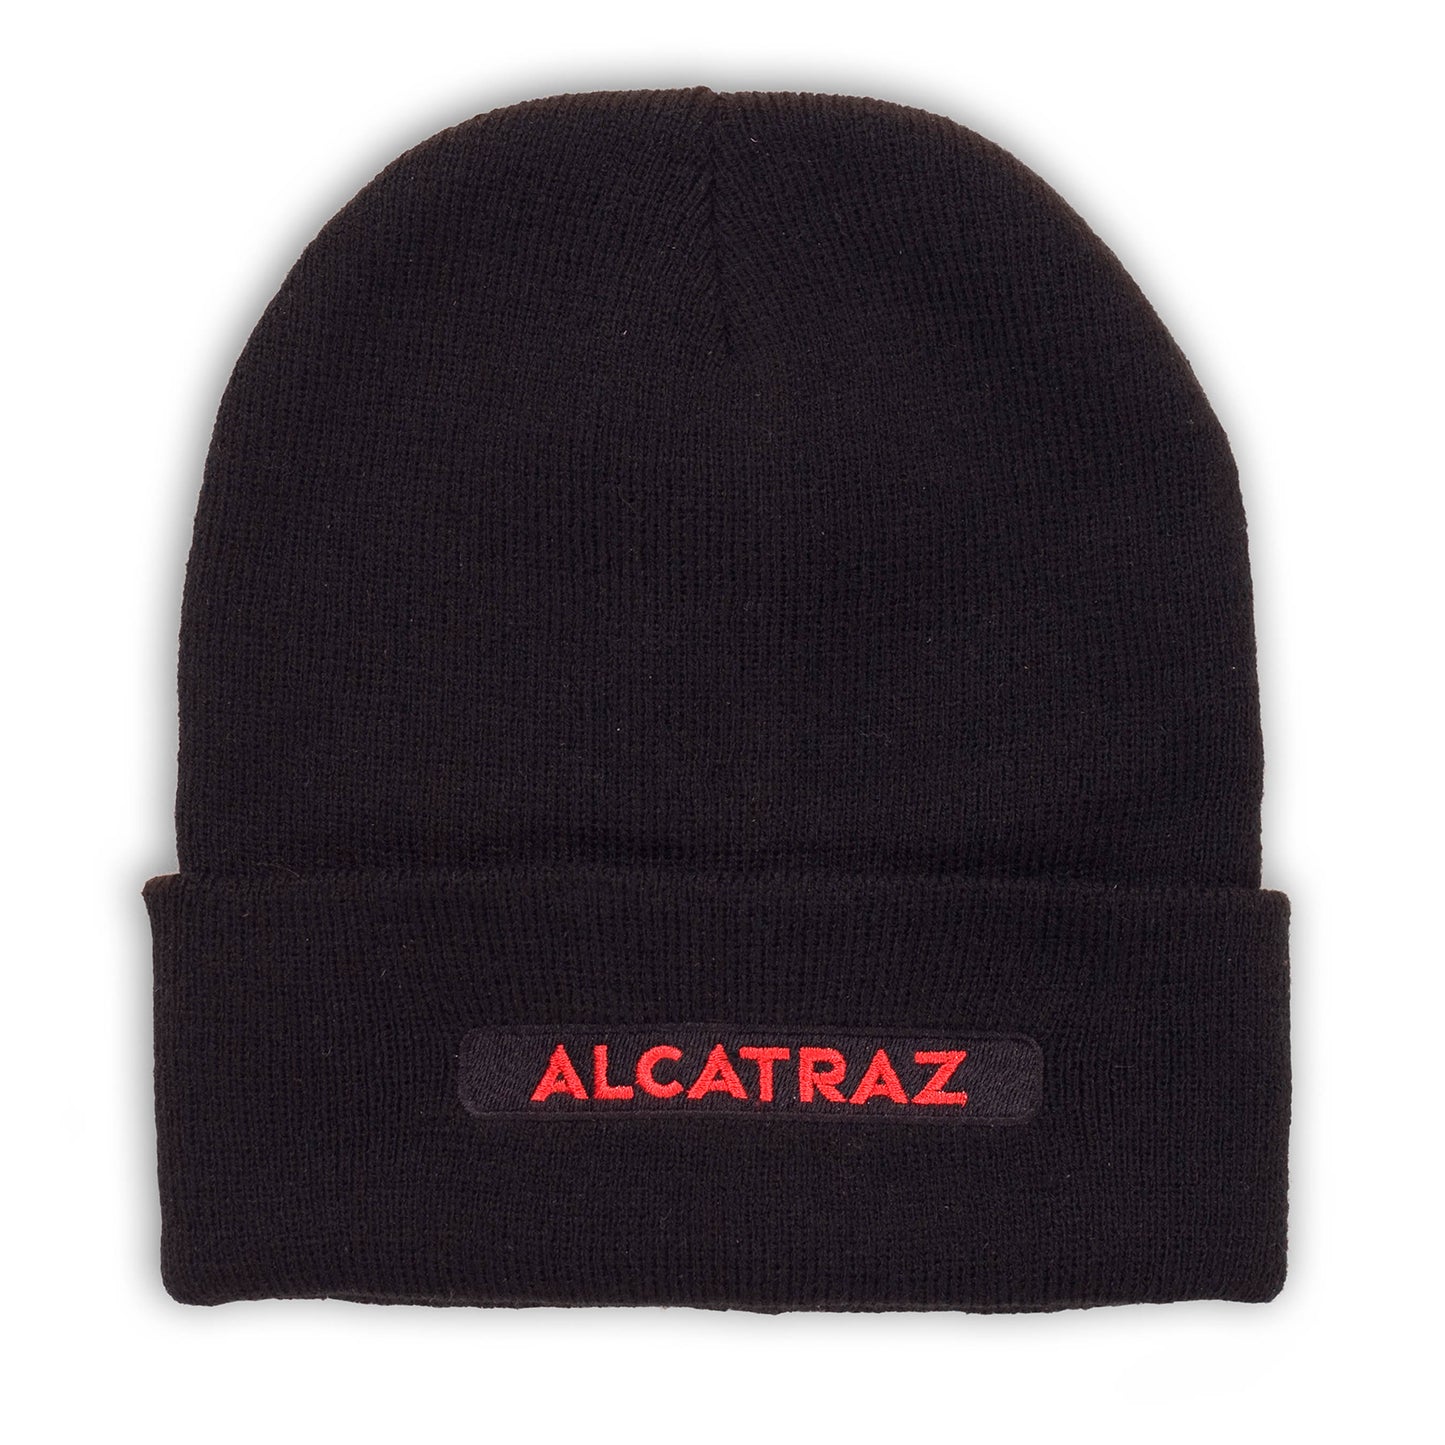 Black acrylic knit cap with "Alcatraz" text embroidered in bright red thread.